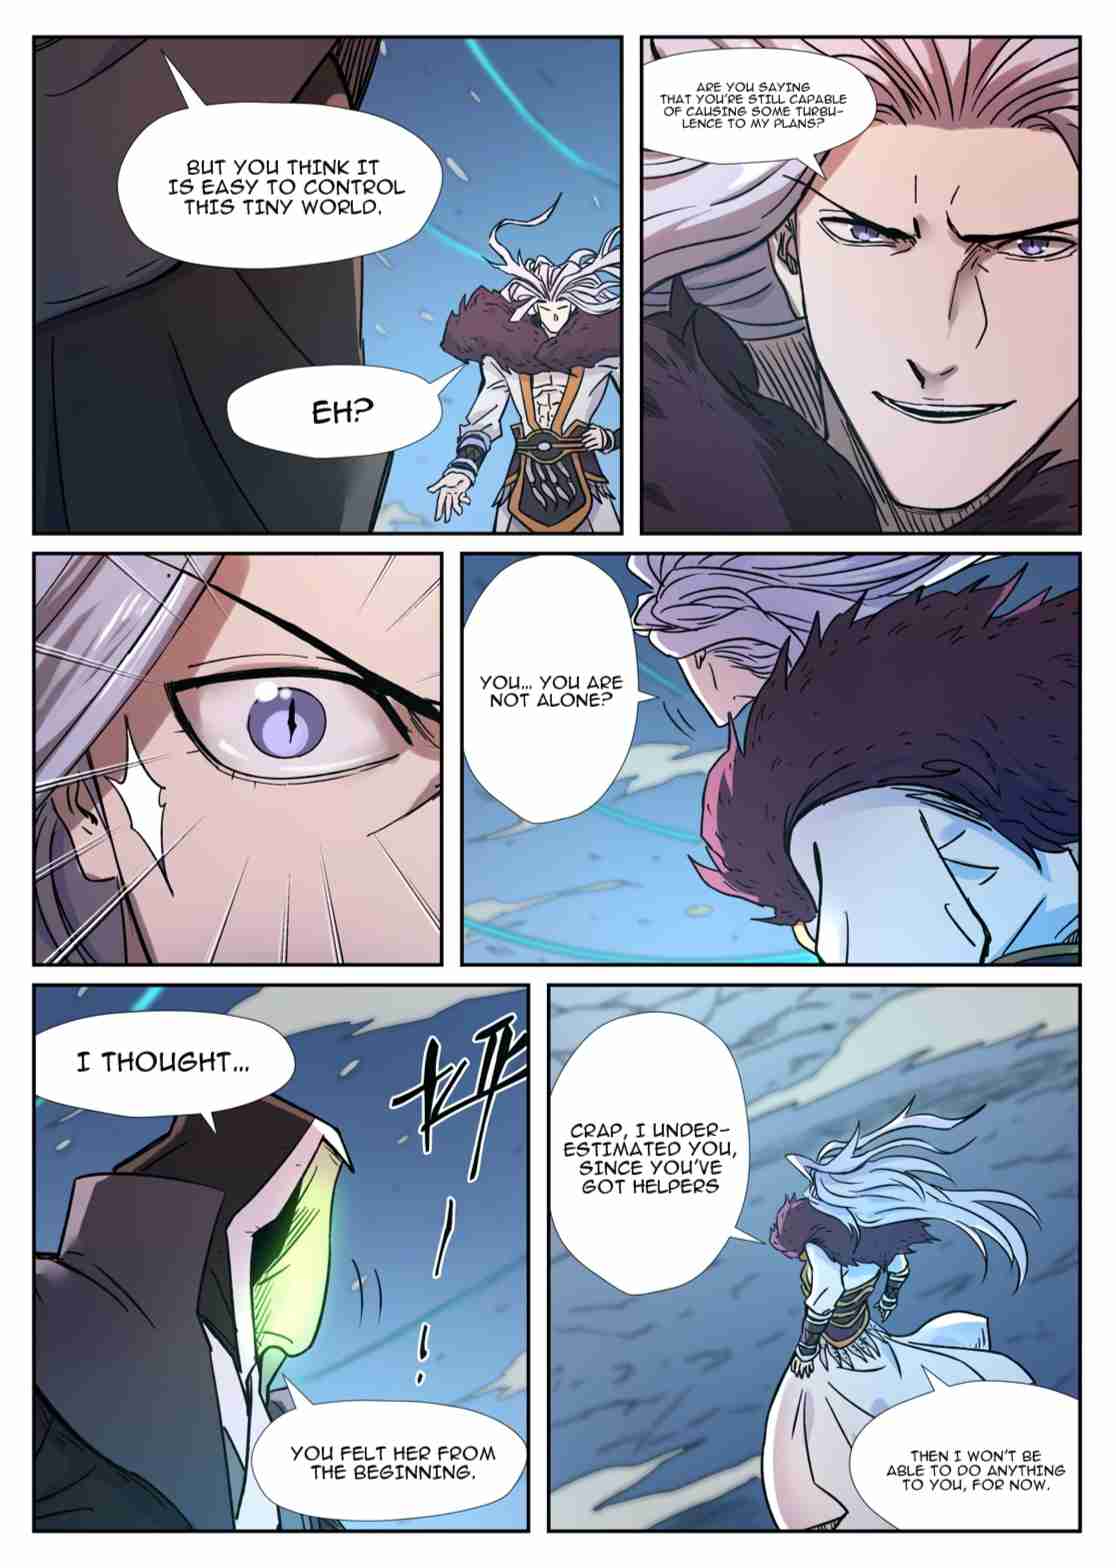 Tales of Demons and Gods Ch. 283.5